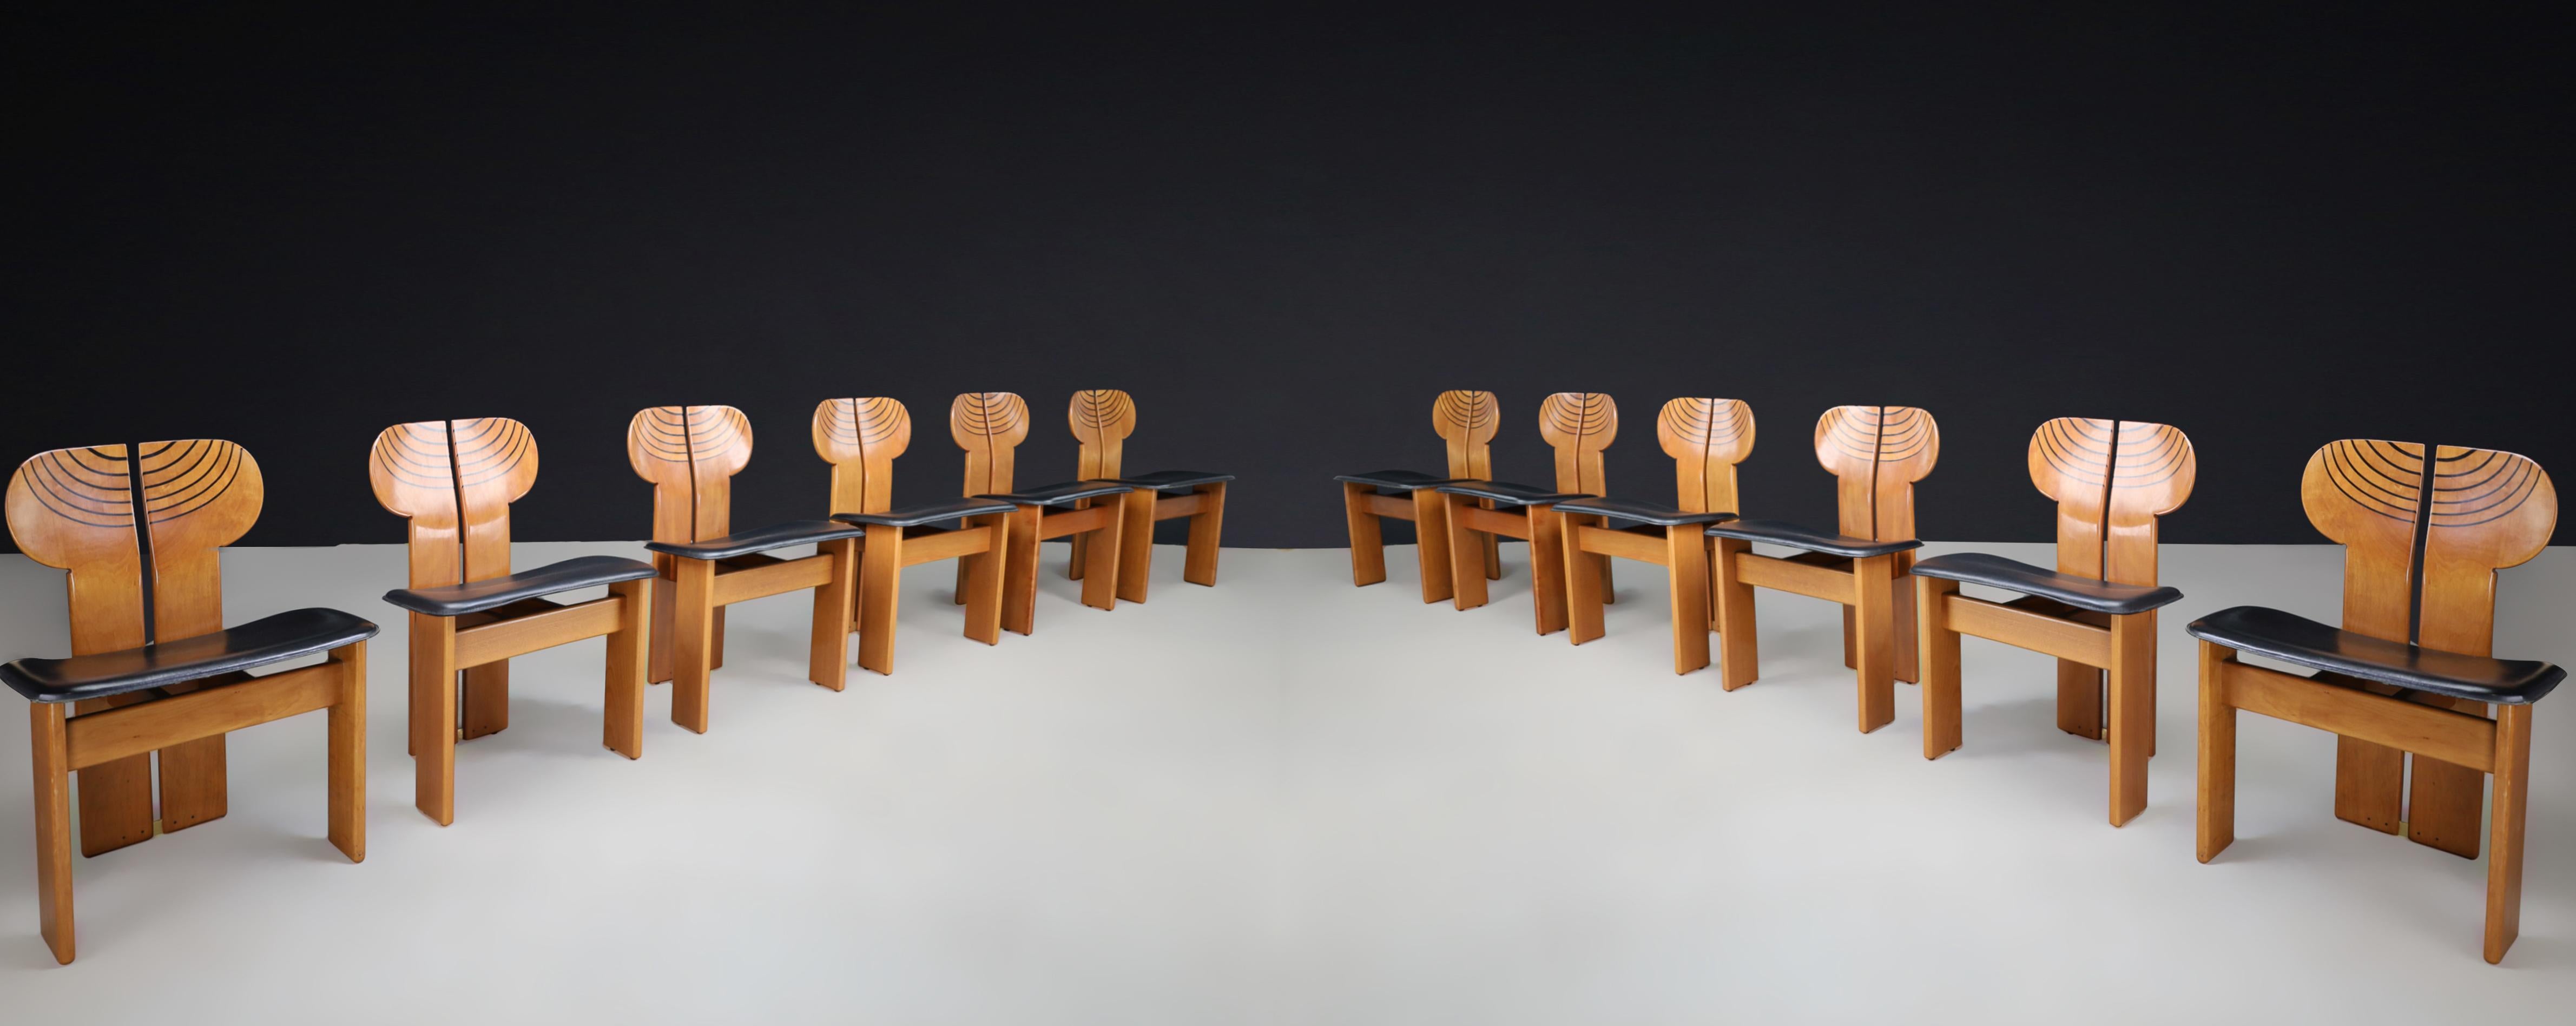 Afra & Tobia Scarpa for Maxalto Set of 12 'Africa' Dining Chairs Italy, 1975 For Sale 9